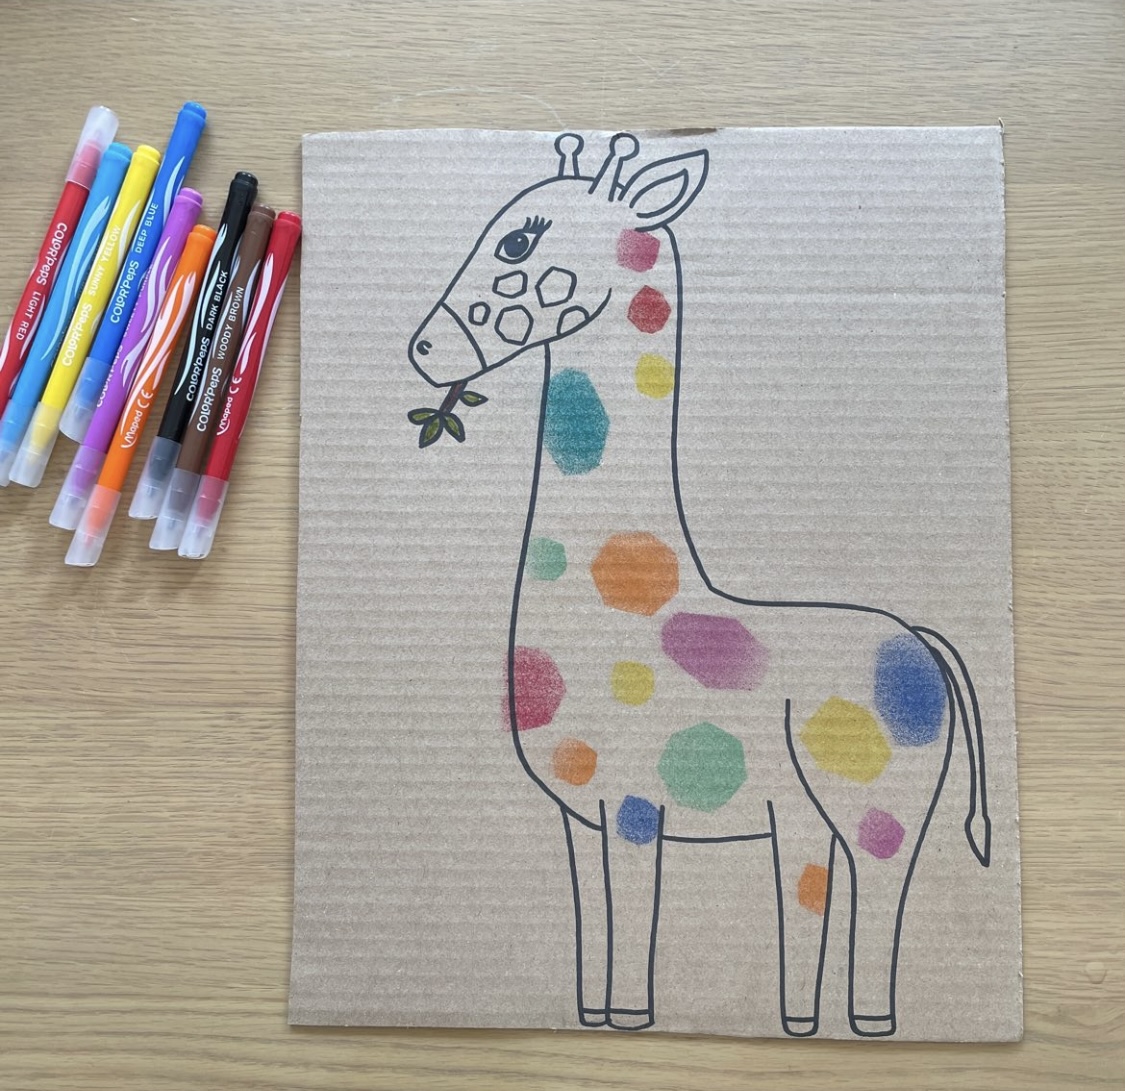 A rainbow giraffe made with blow pens lay on the left hand side